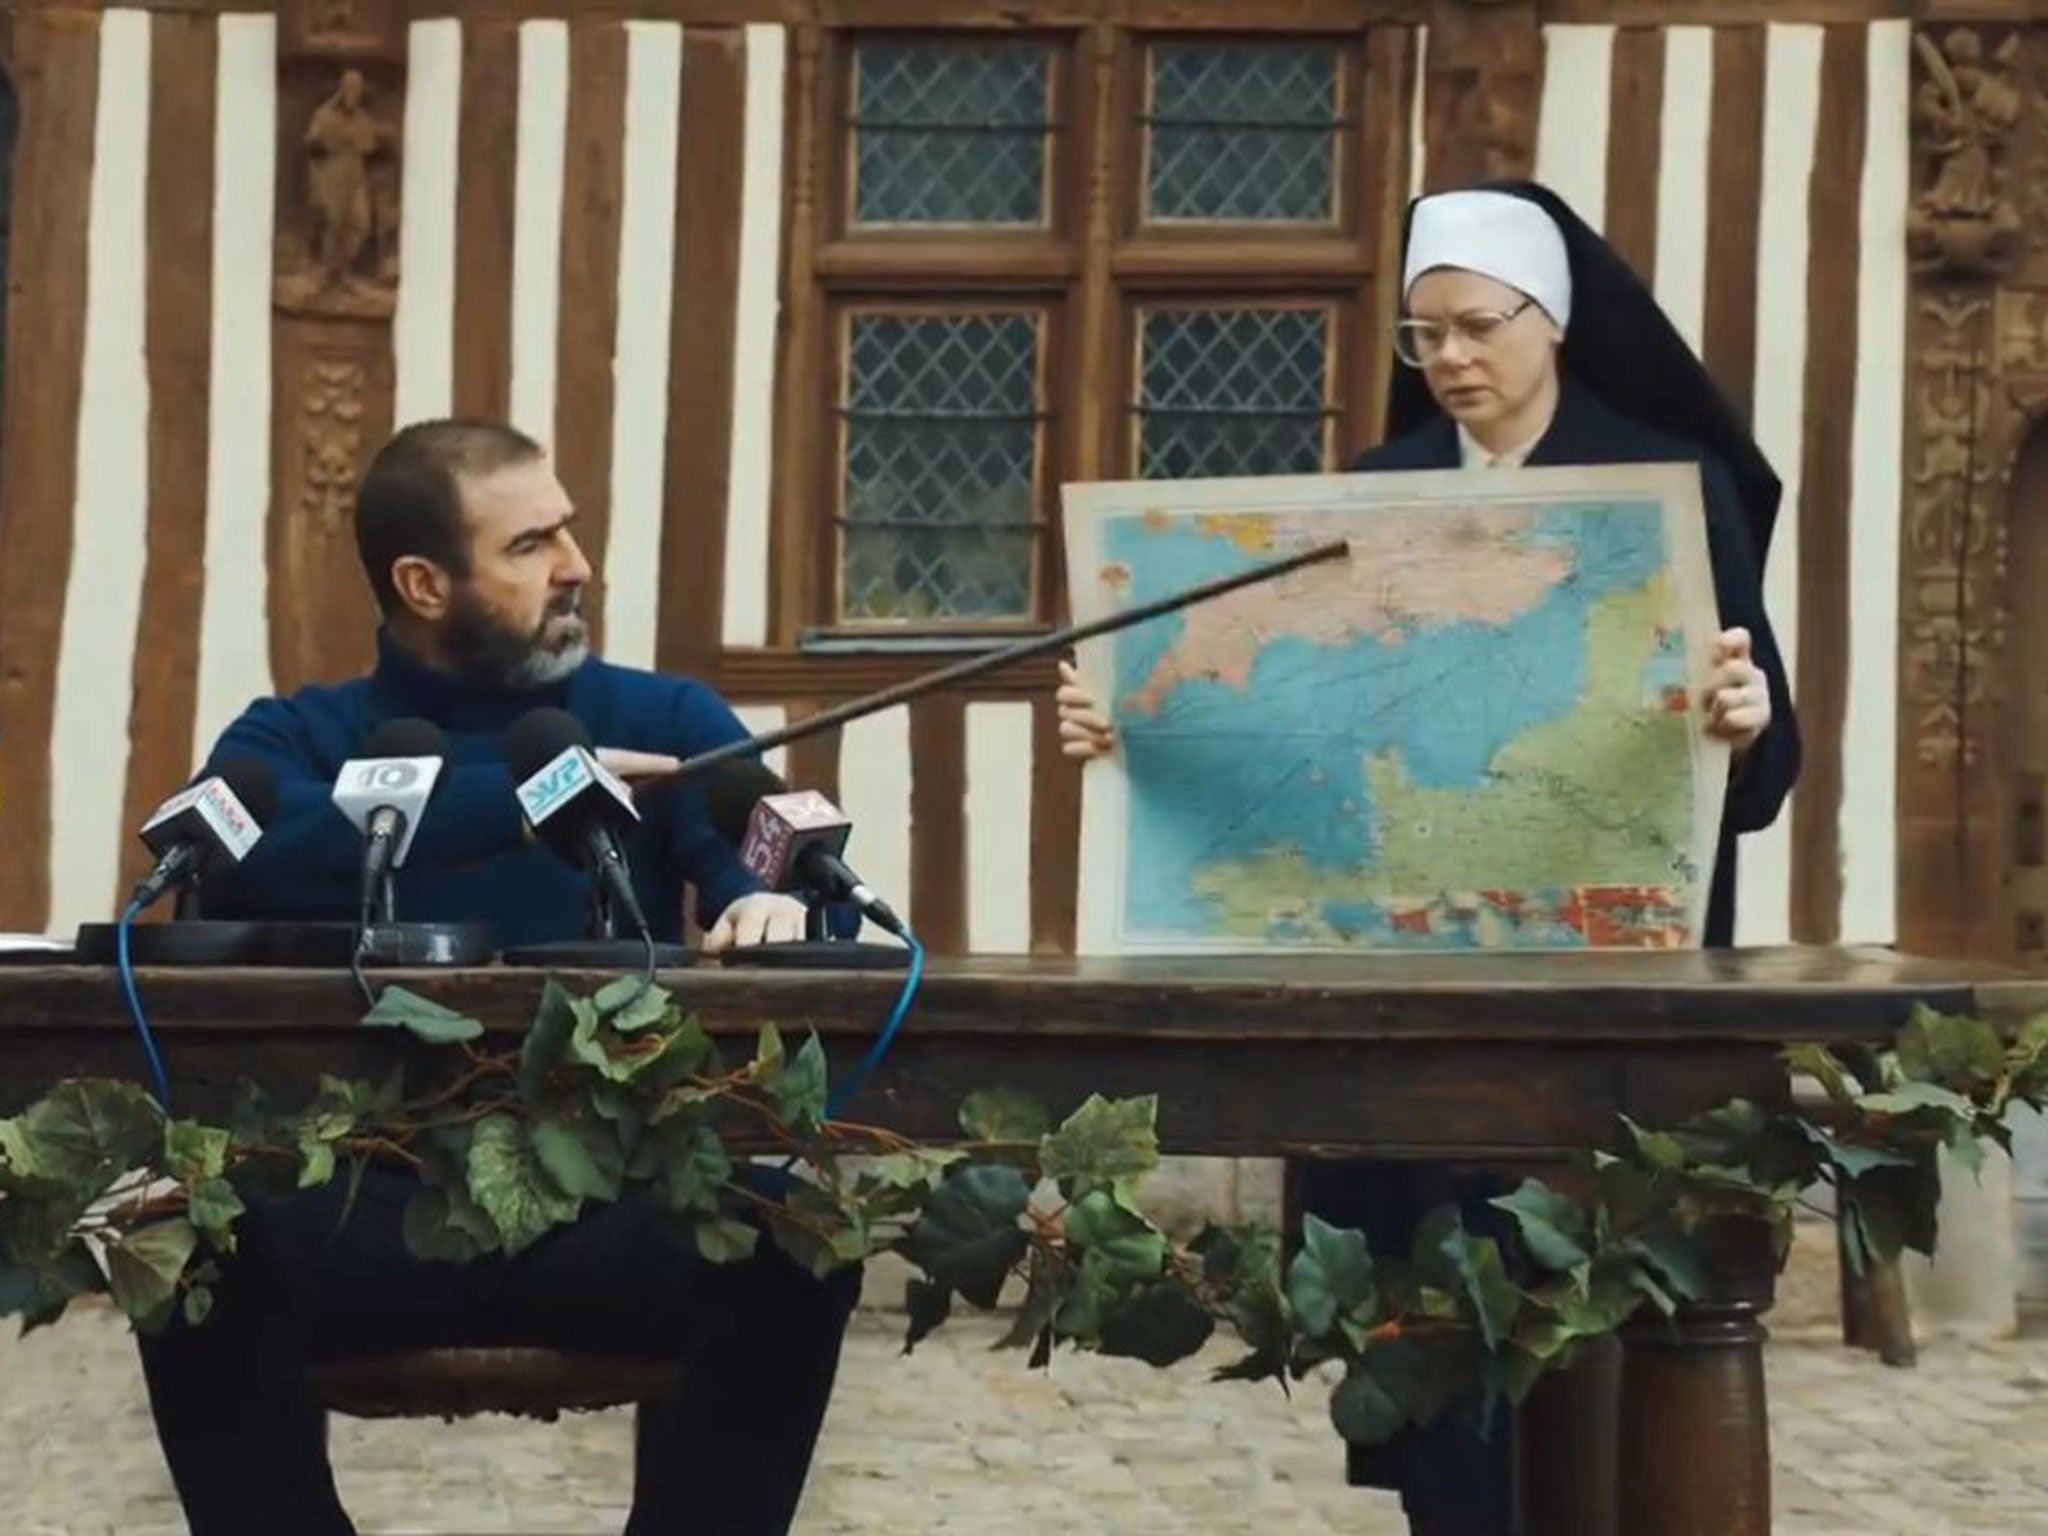 Cantona correctly identifies where the English Channel is